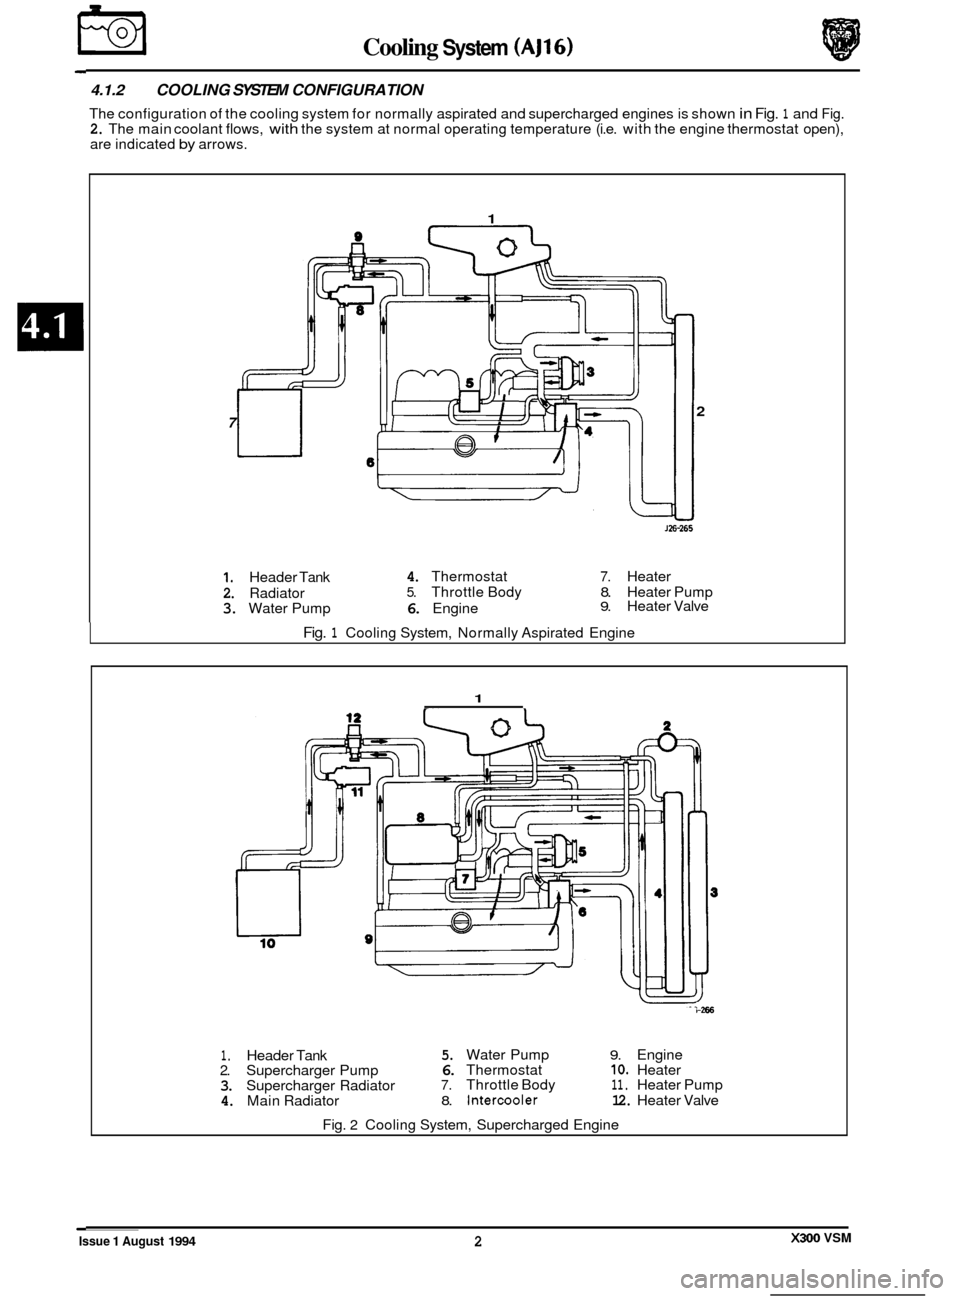 JAGUAR XJ6 1994 2.G Workshop Manual €3 Cooling System (AJ16) 
4.1.2 COOLING SYSTEM CONFIGURATION 
The configuration of  the cooling  system for normally  aspirated  and supercharged engines  is shown in Fig. 1 and Fig. 2. The  main  c